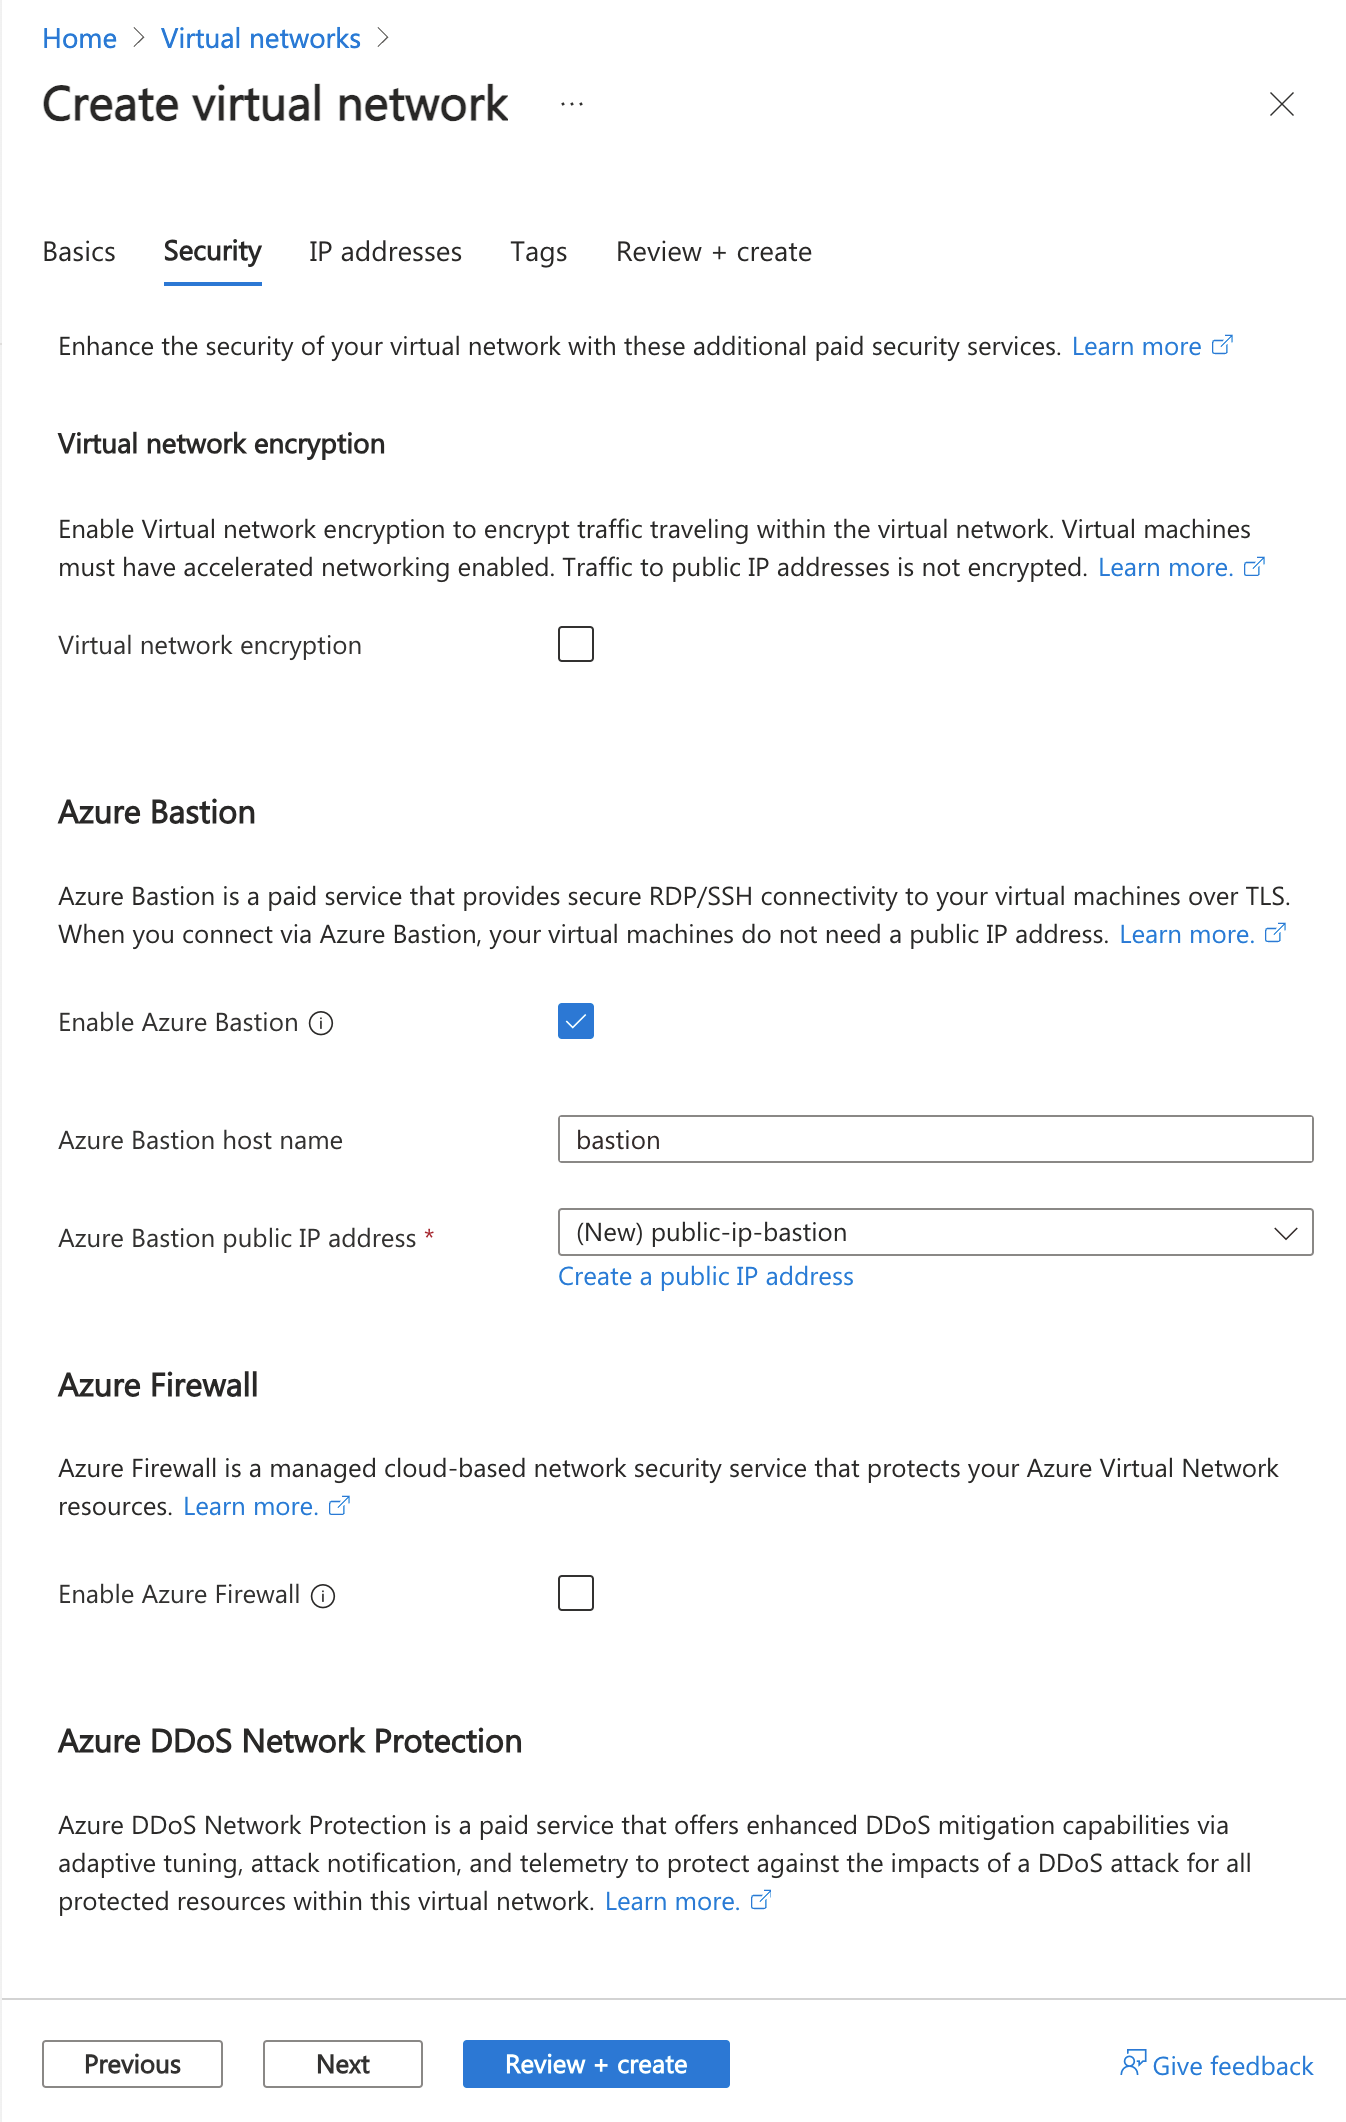 Screenshot of enable bastion host in Create virtual network in the Azure portal.